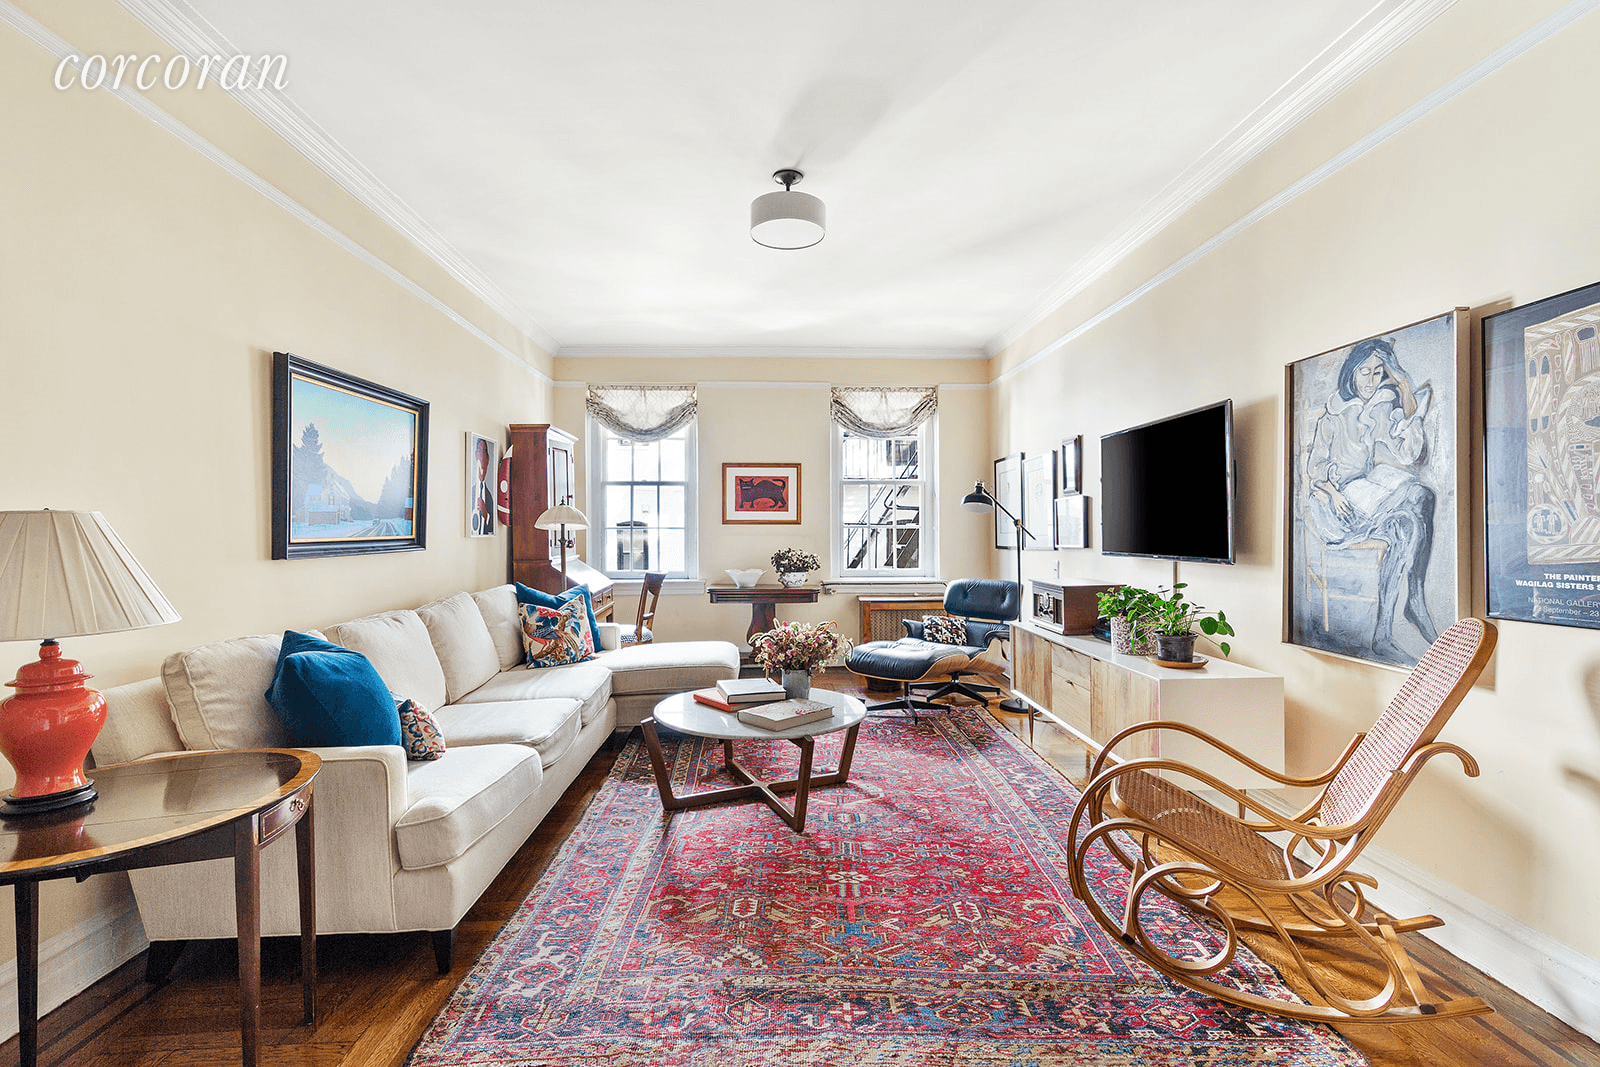 This sunny, classic two bedroom prewar gem perched on the fifth floor of an immaculate elevator co op in prime Brooklyn Heights is a true find.